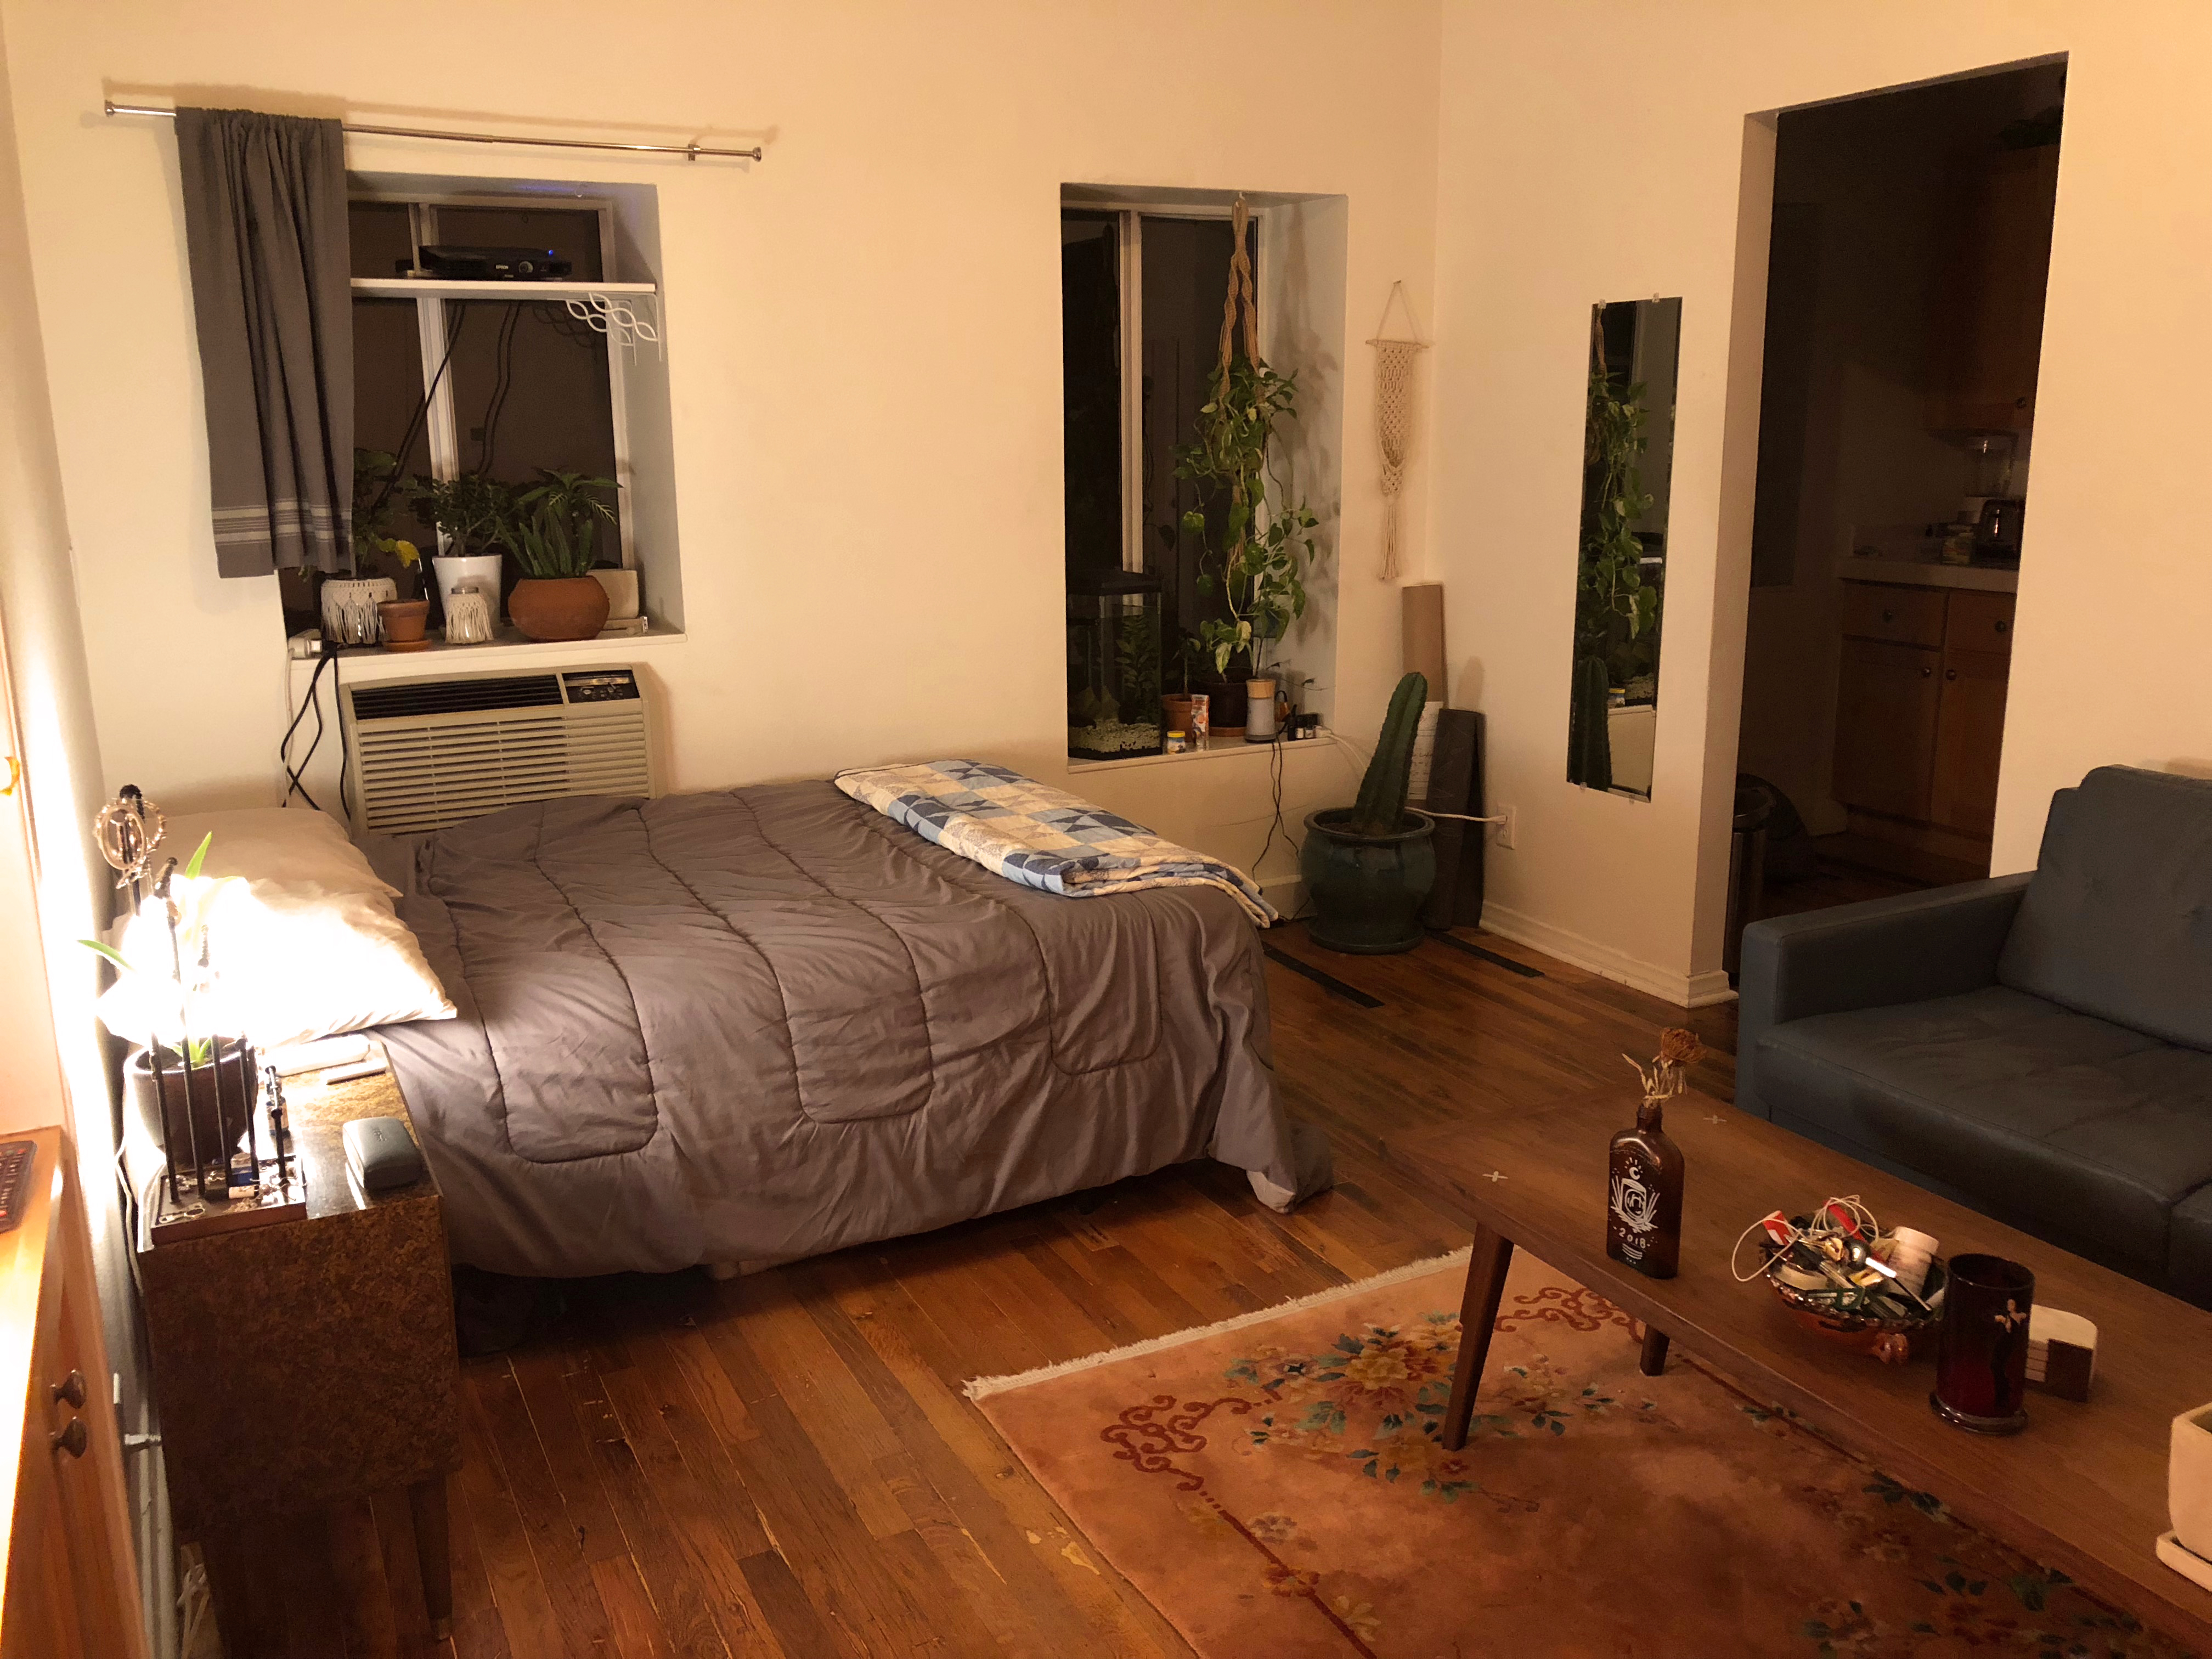 A bedroom with plants in warm lighting 